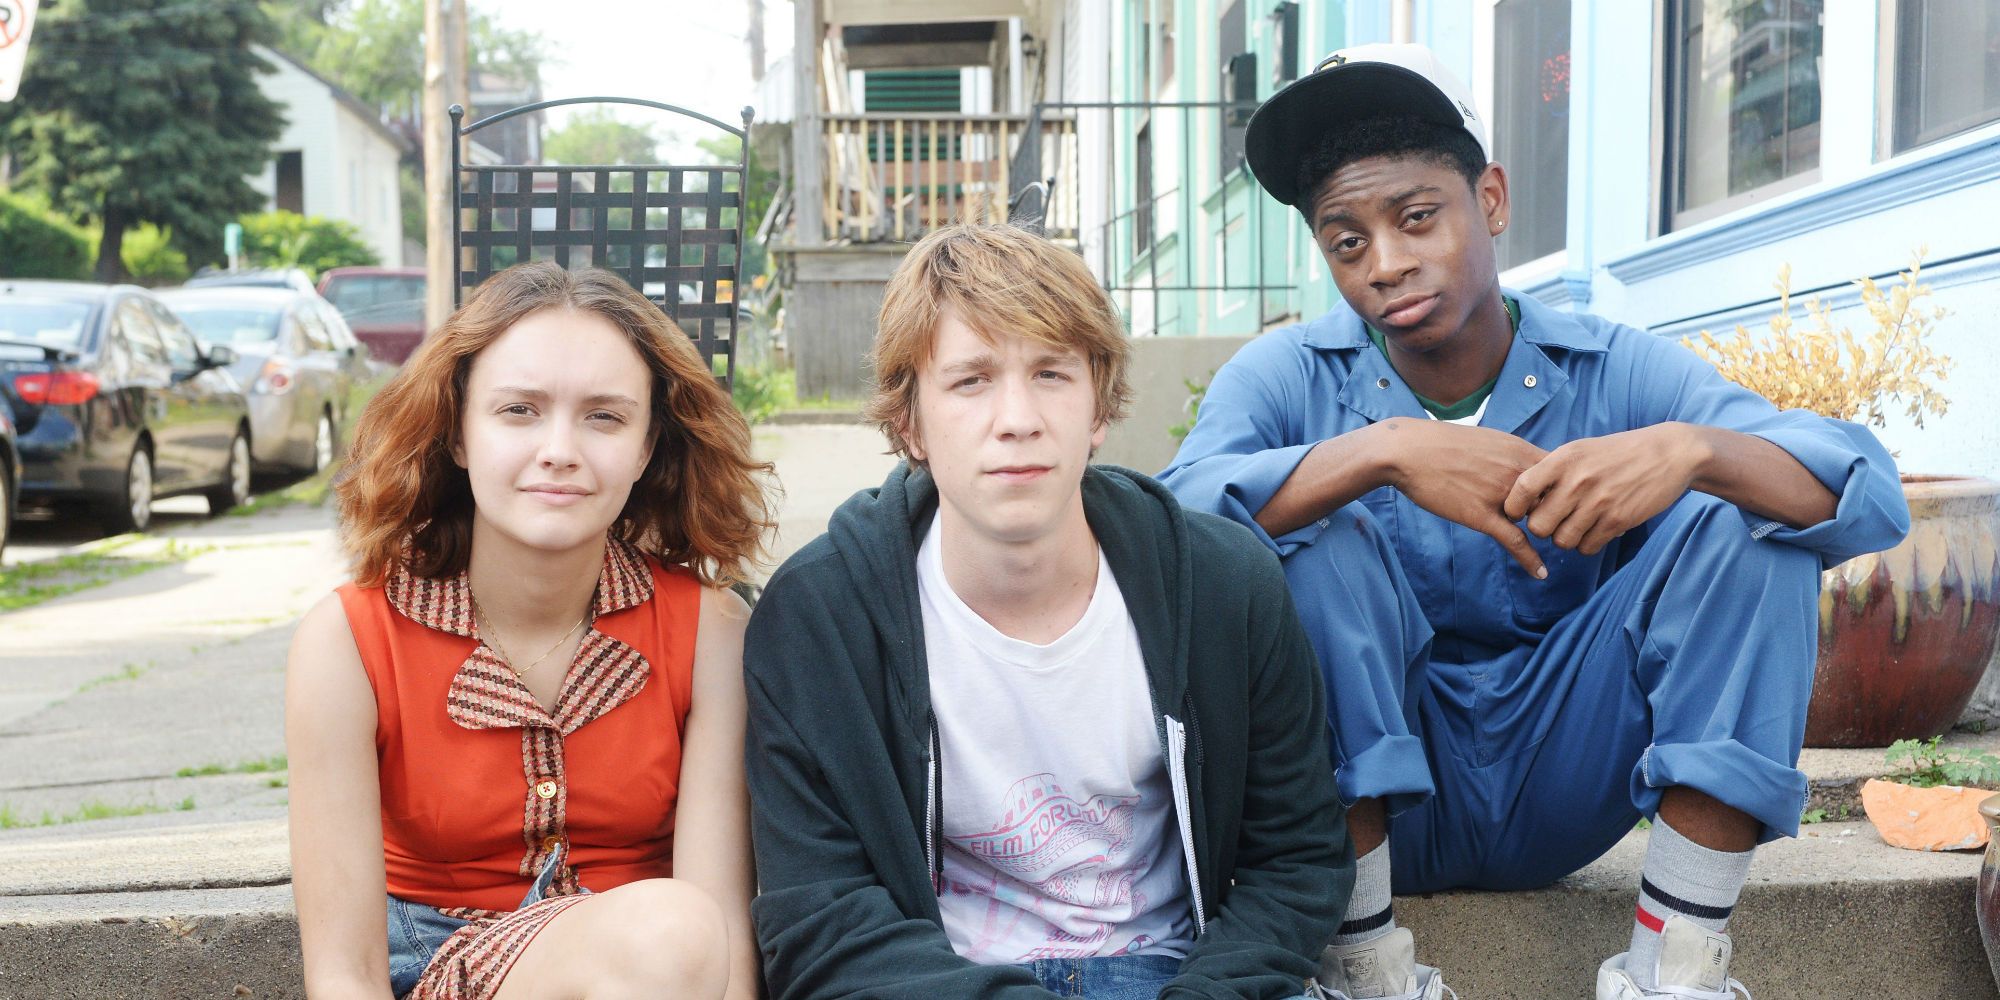 Olivia Cooke, Thomas Mann, and RJ Cyler sitting together in Me And Earl And The Dying Girl Olivia Cooke Thomas Mann RJ Cyler